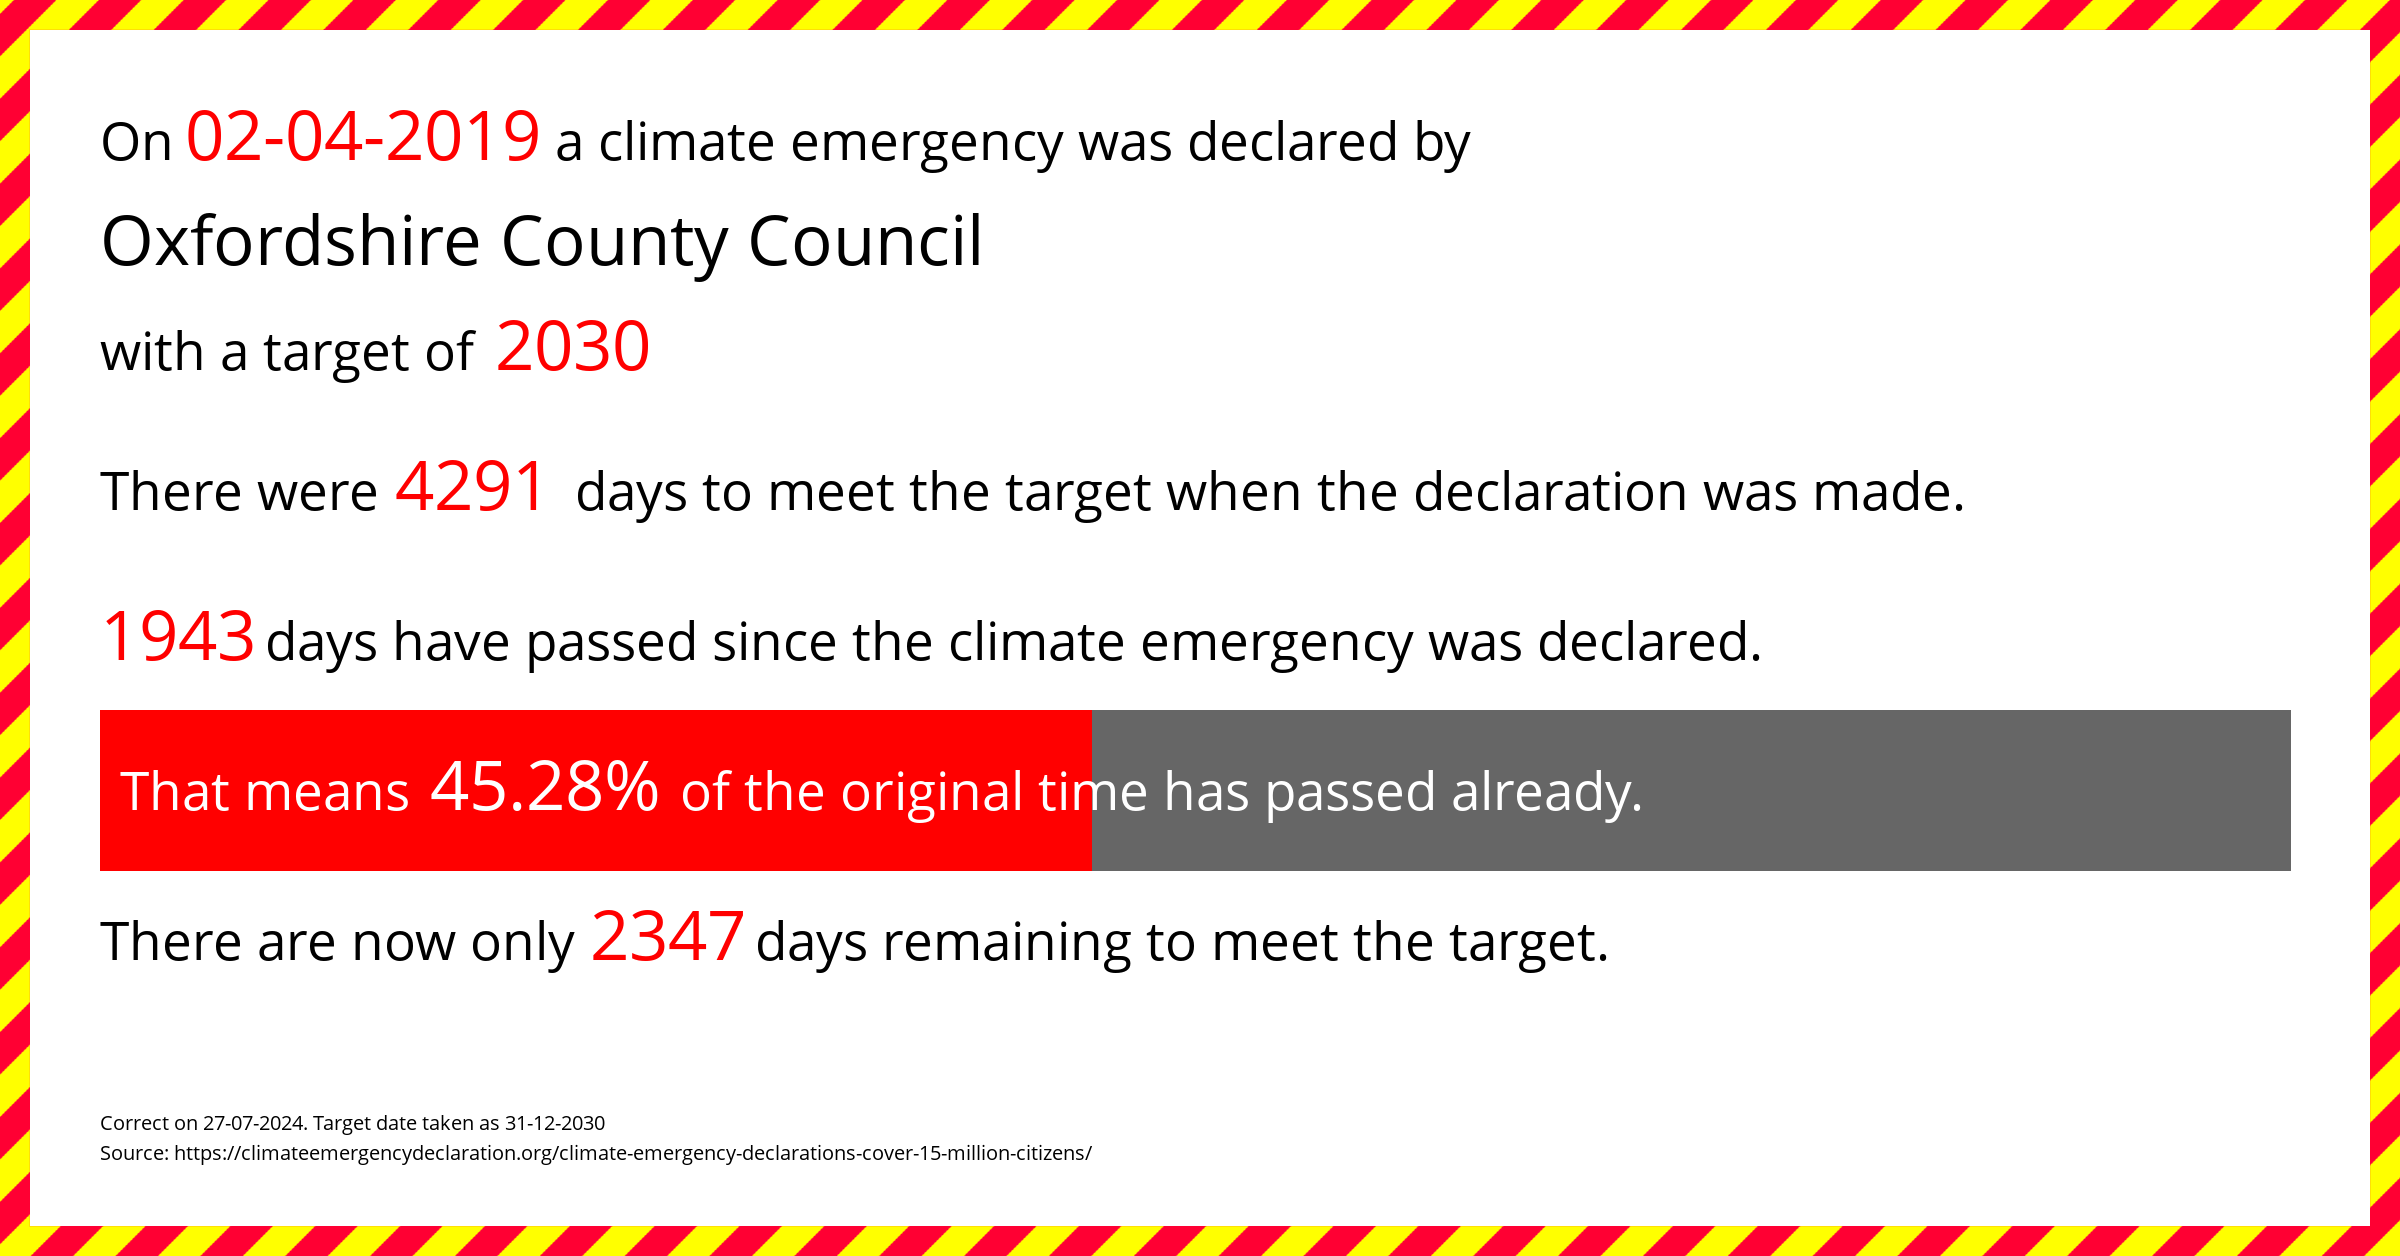 Oxfordshire County Council declared a Climate emergency on Tuesday 2nd April 2019, with a target of 2030.